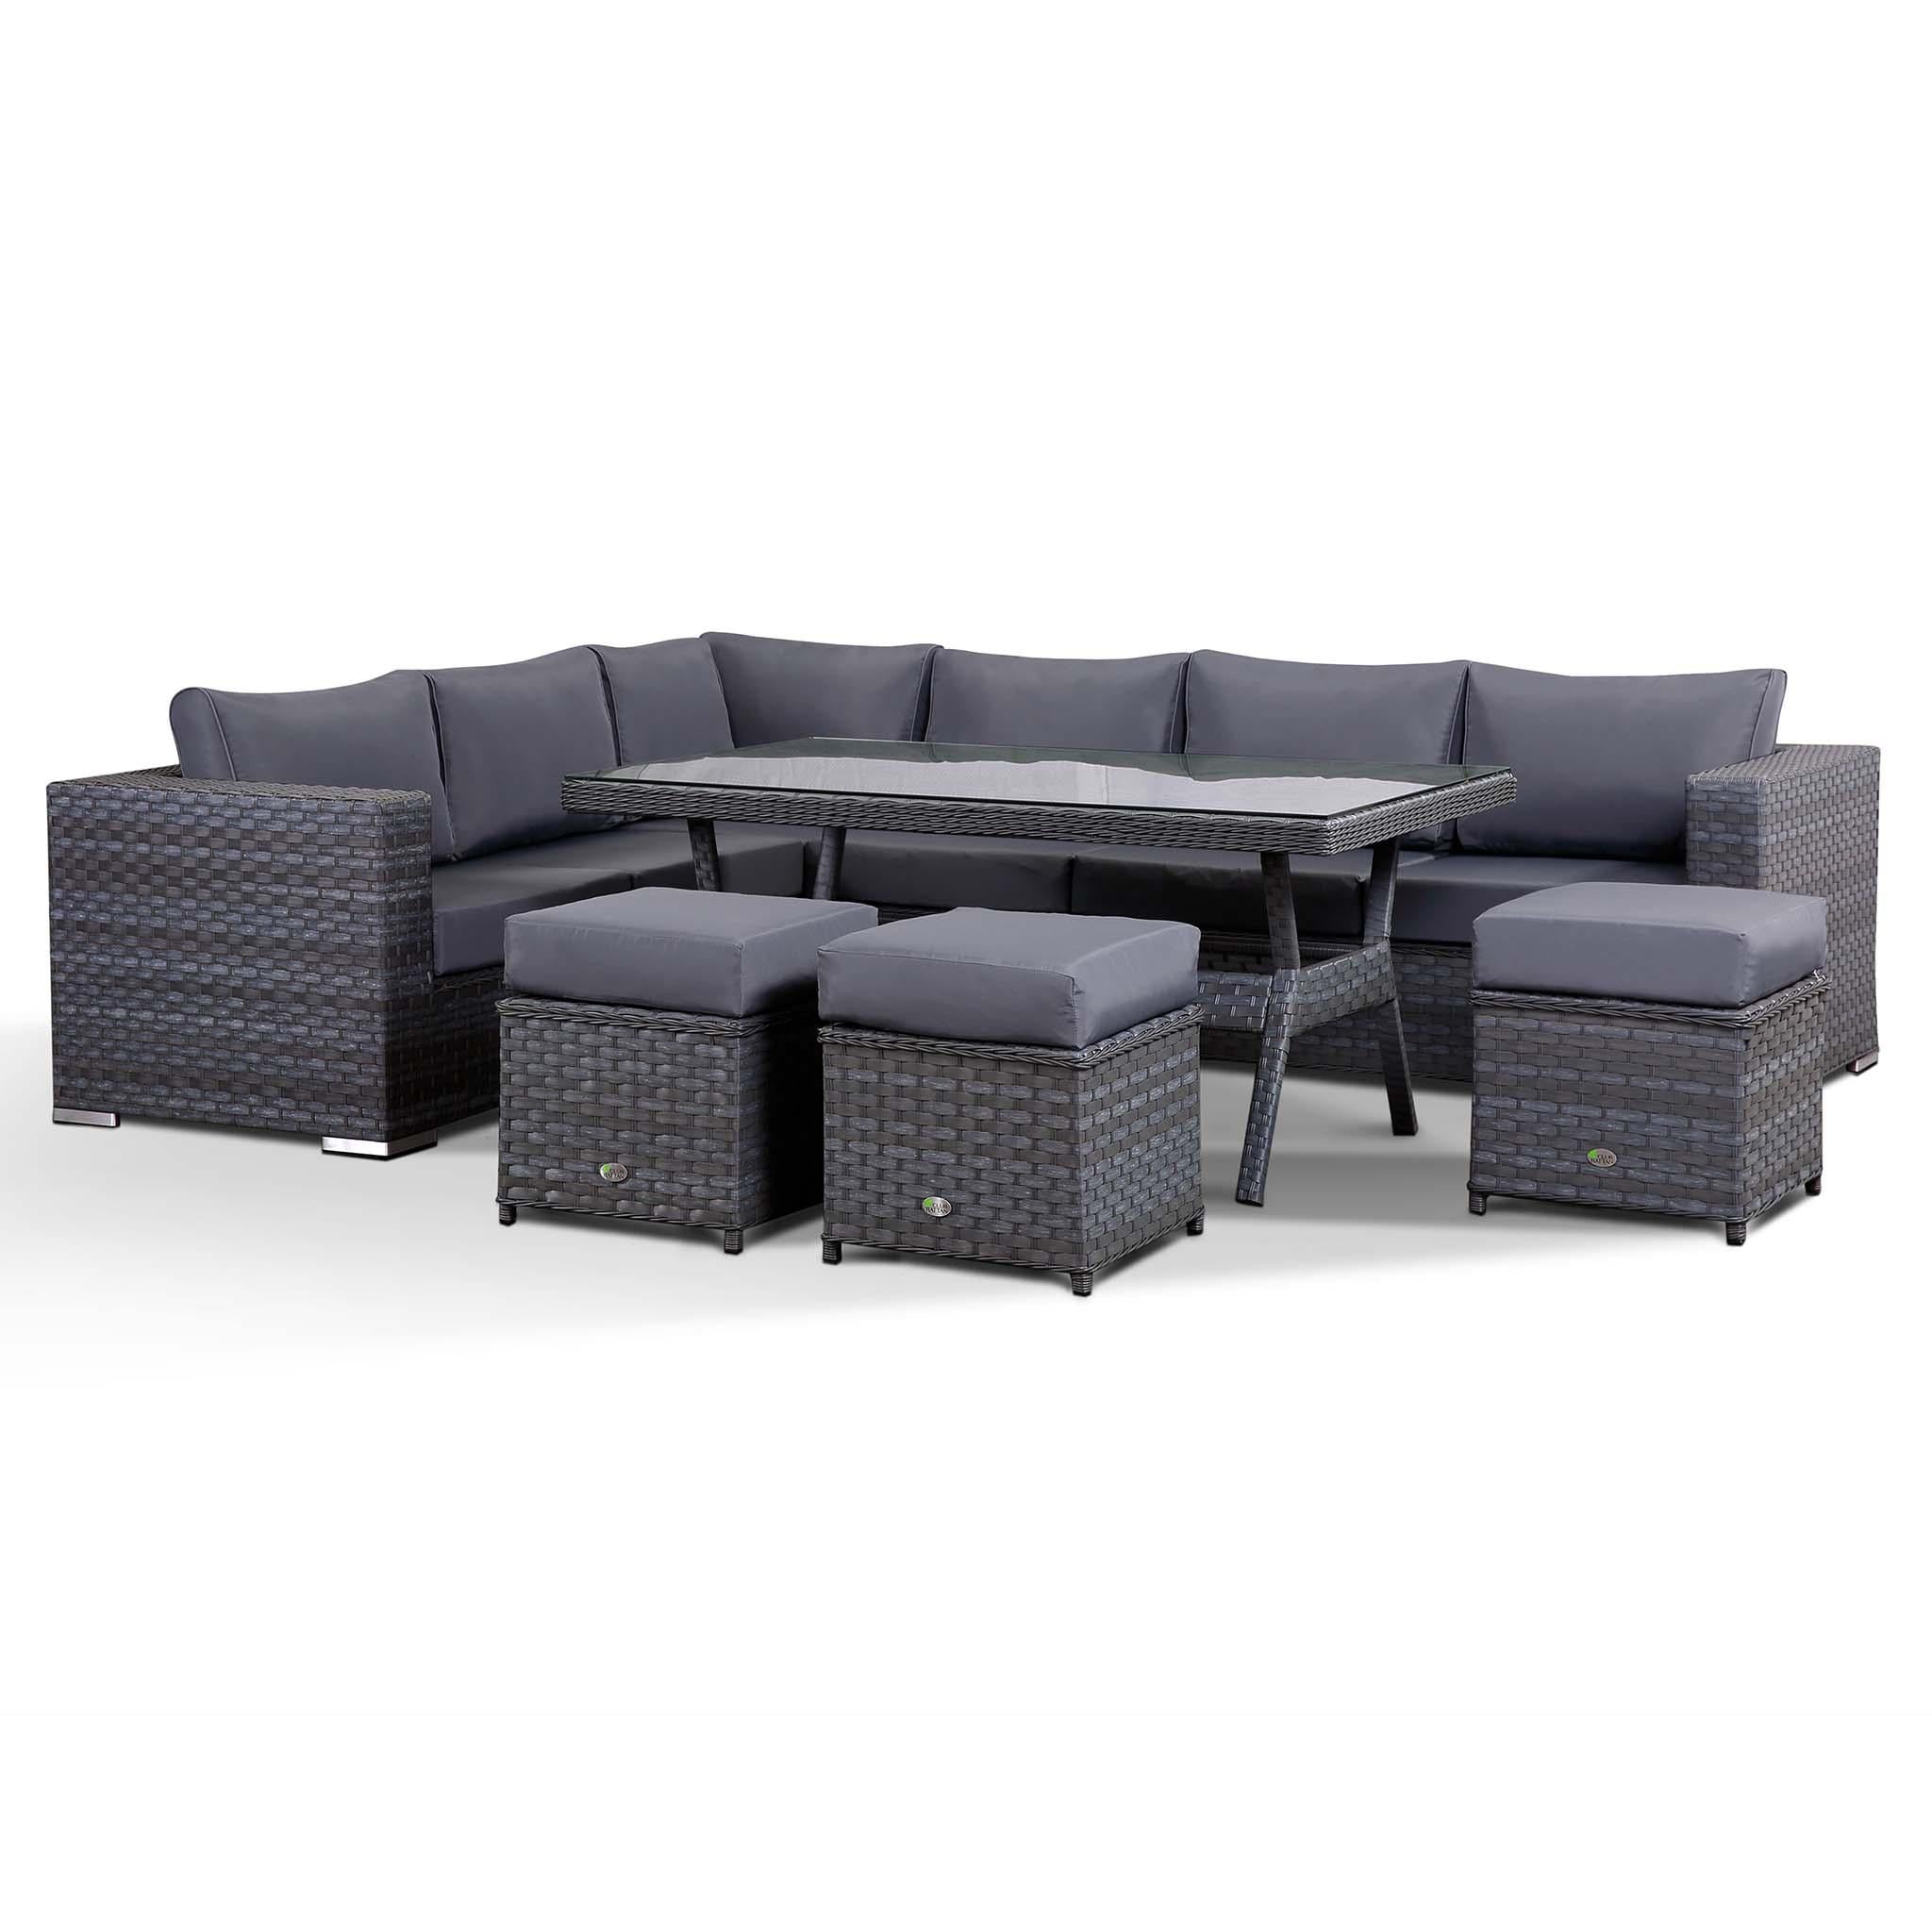 Club Rattan Isobella Outdoor Corner Sofa Set With Dining Table In Grey